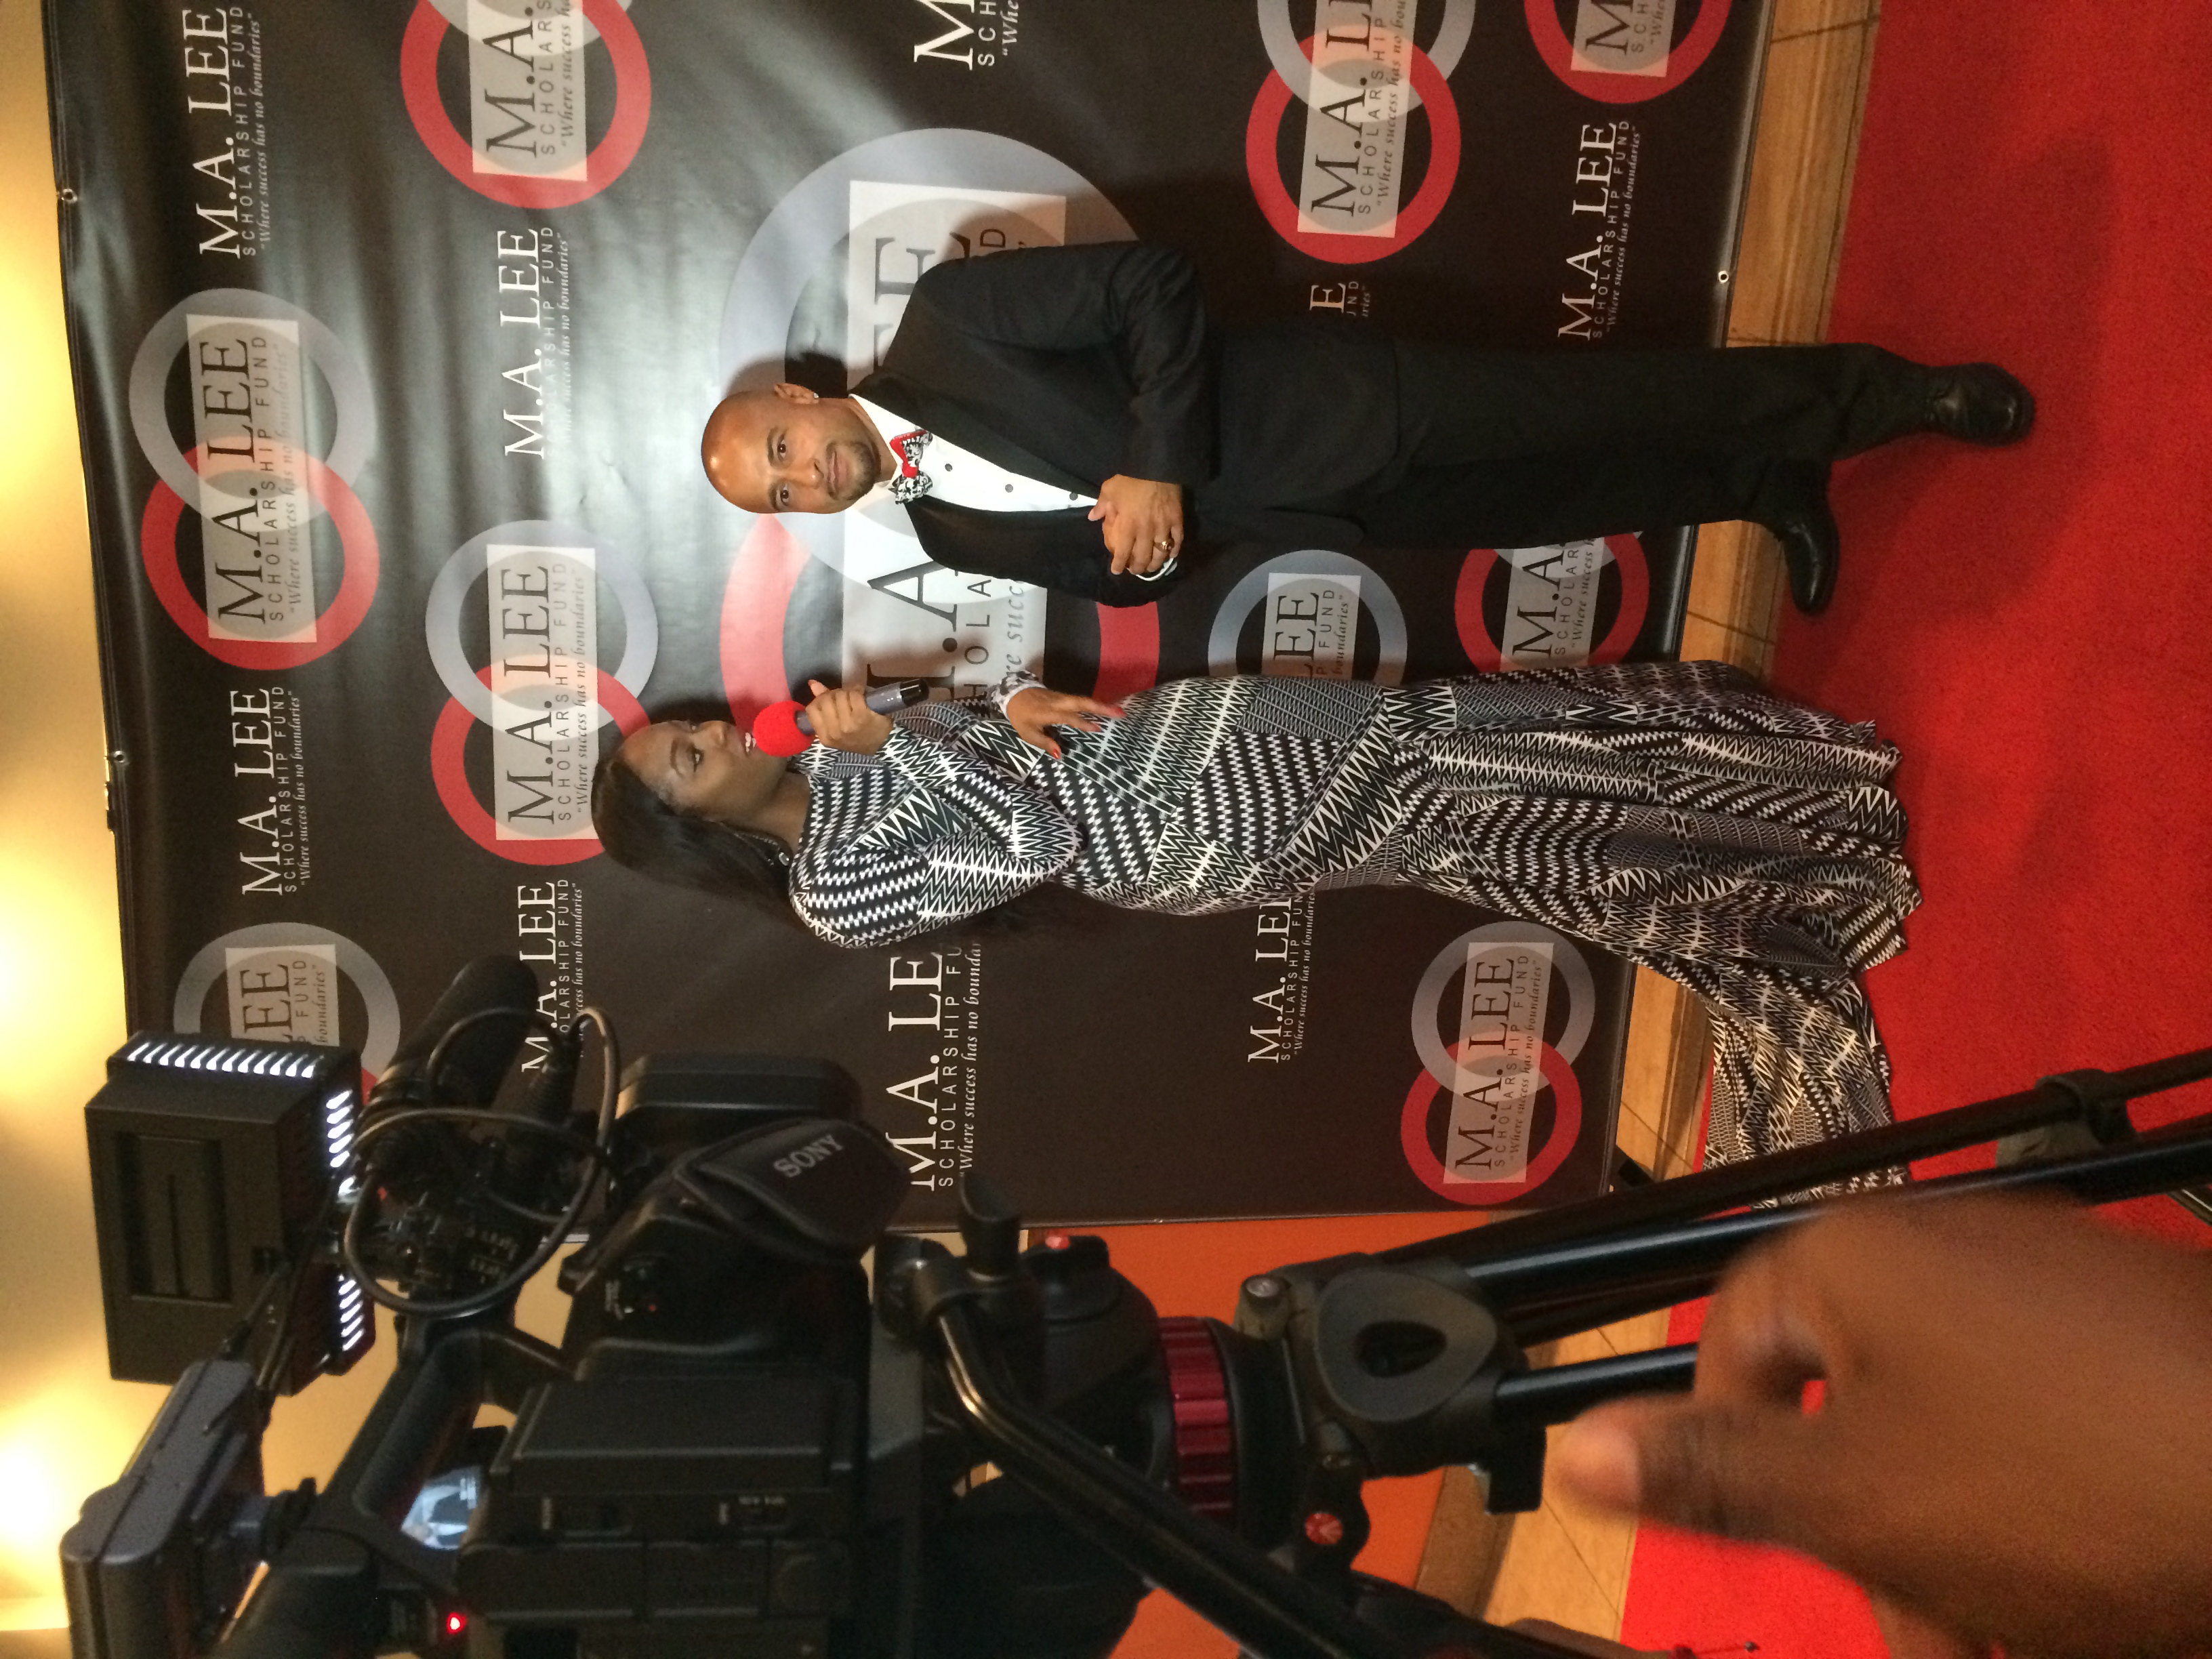 Choreographer Chuck Maldonado being interviewed on the Red Carpet of the M.A. Lee Scholarship Fund Awards